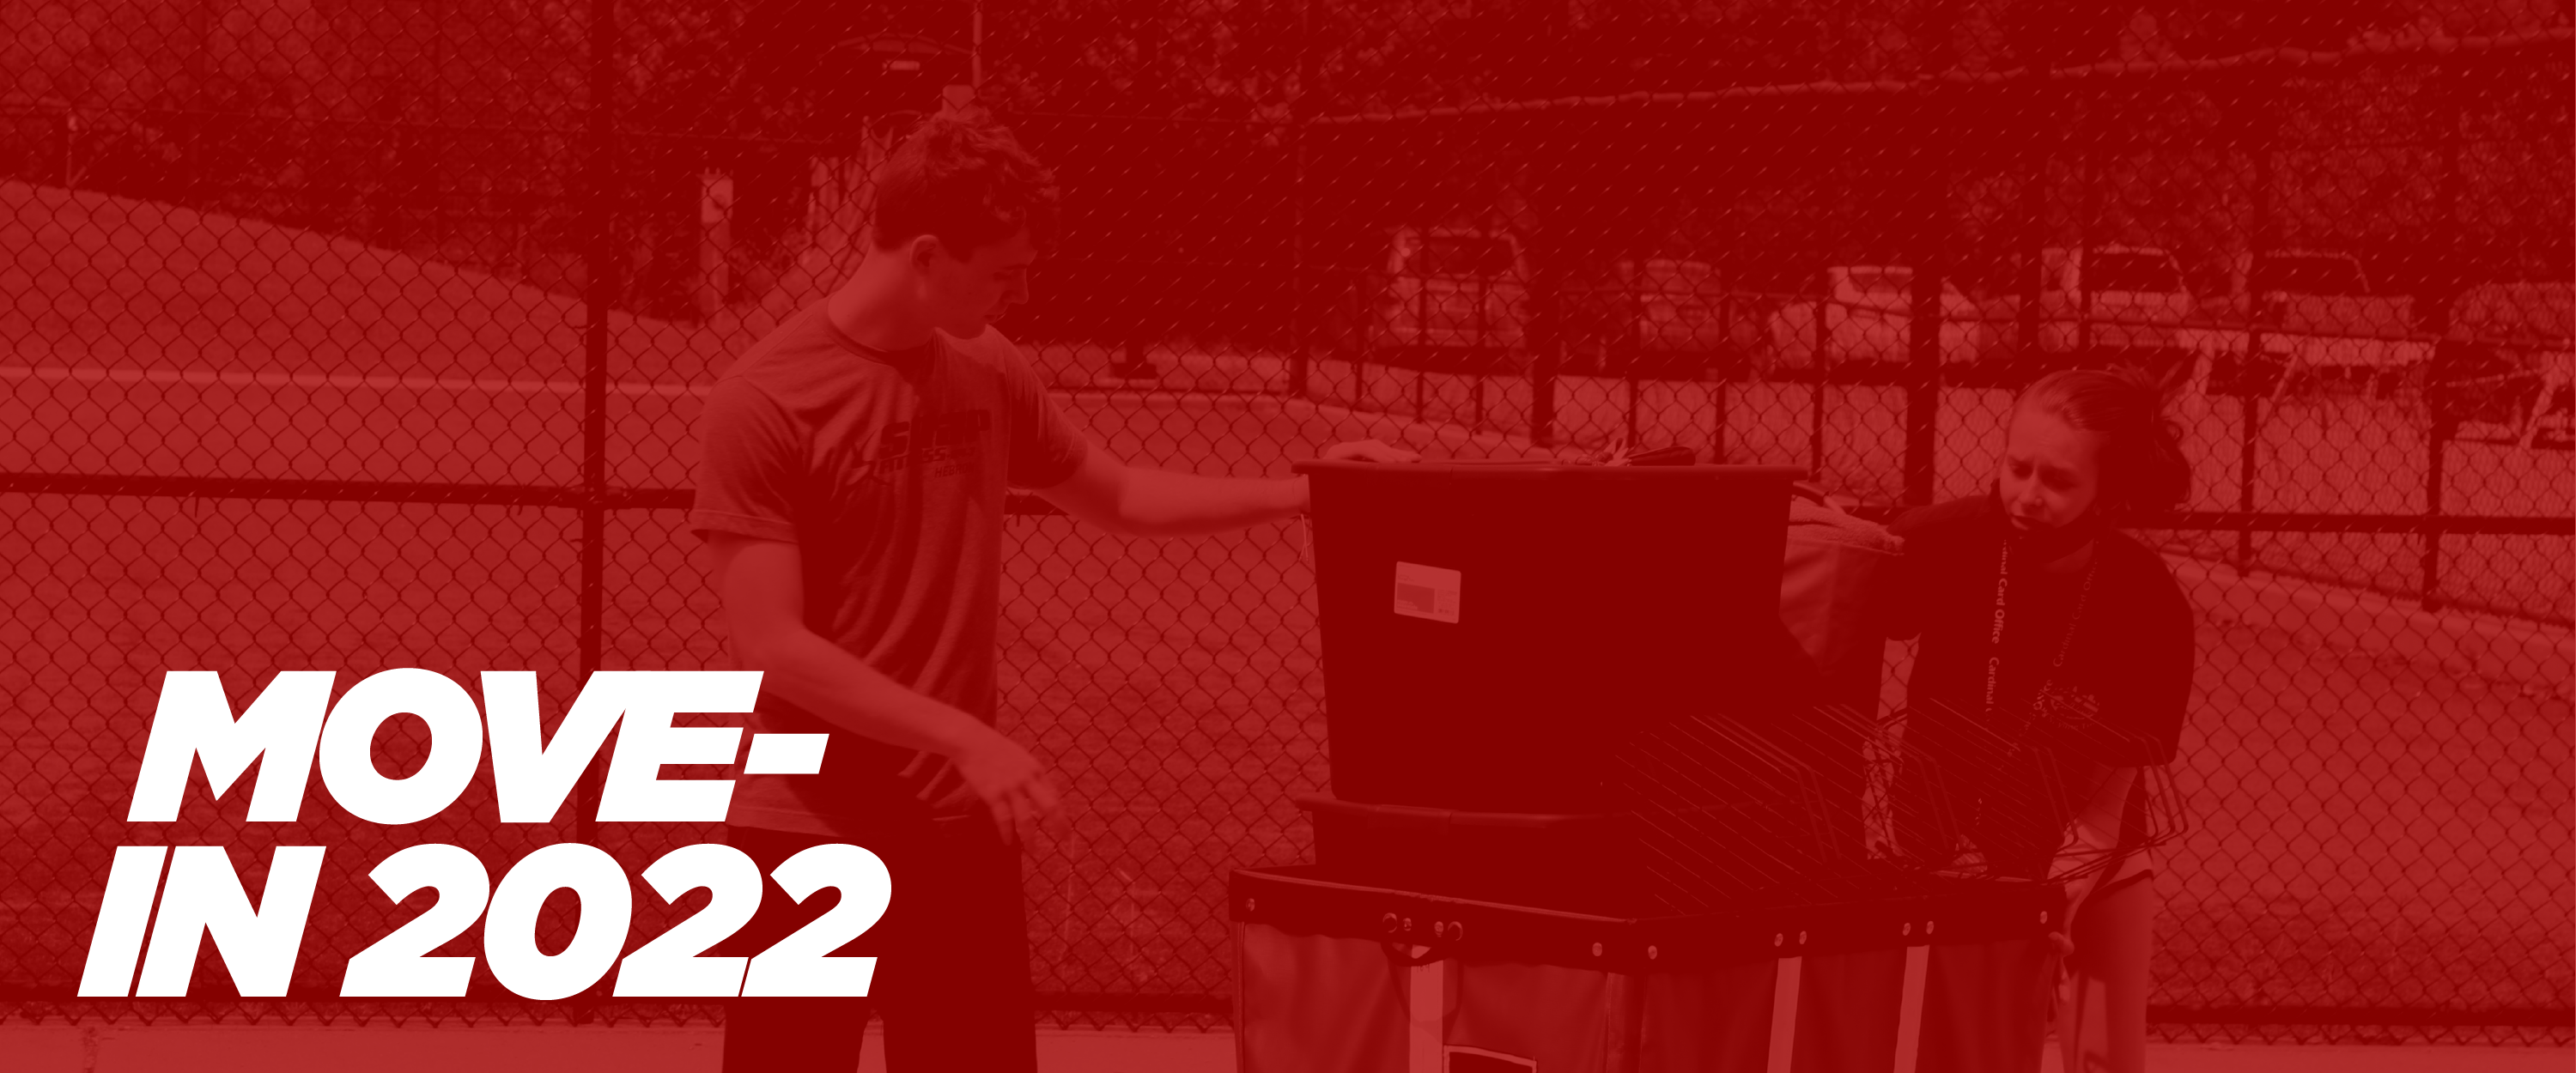 move-in 2022. two students with a moving bin